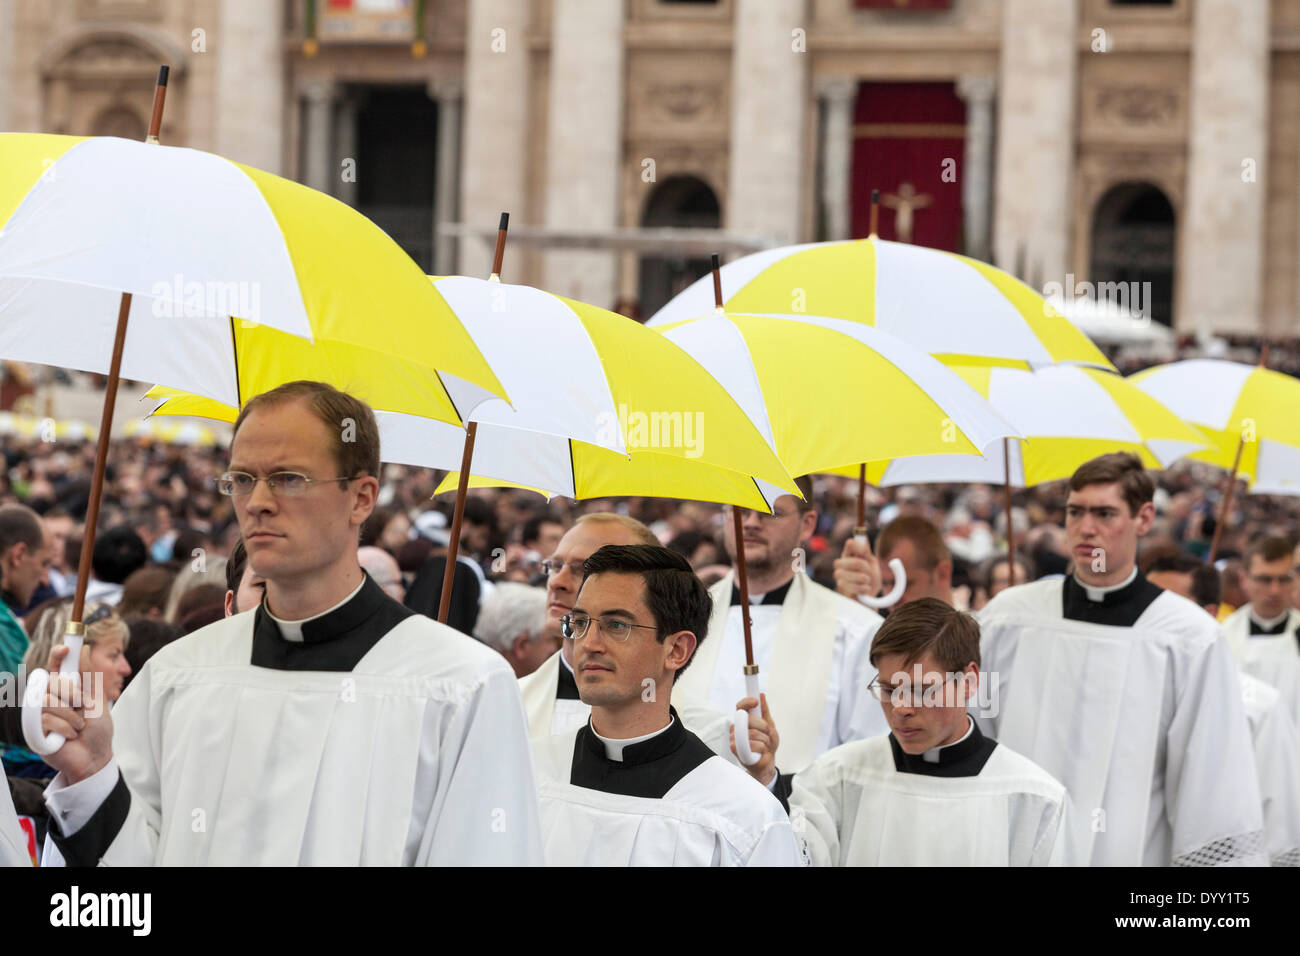 Procession of priest carrying umbrellas in St. Peter's Square Stock Photo